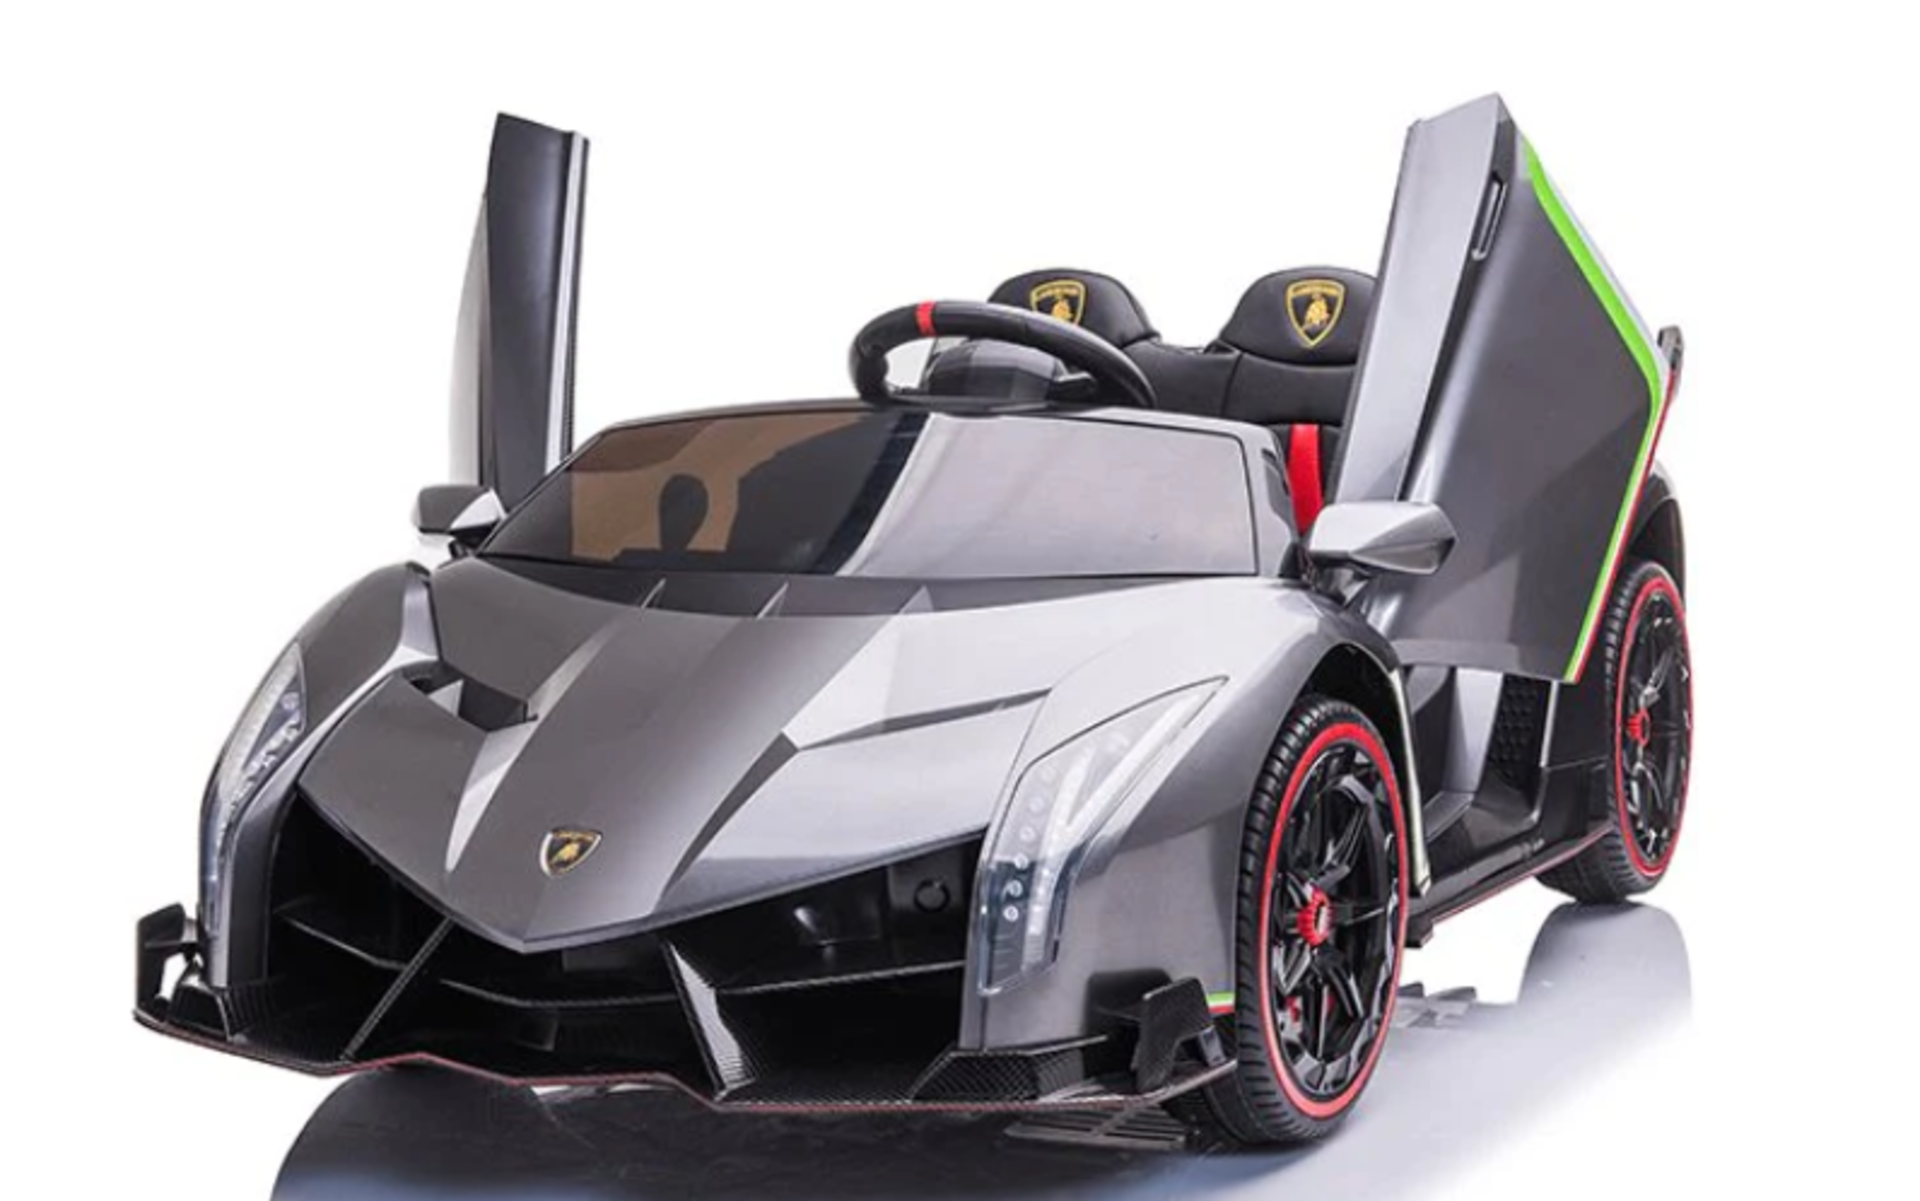 Ultimate Kids Fun: Lamborghini Veneno Ride On Toy - Officially Licensed Ride On Electric Car. -ER54.